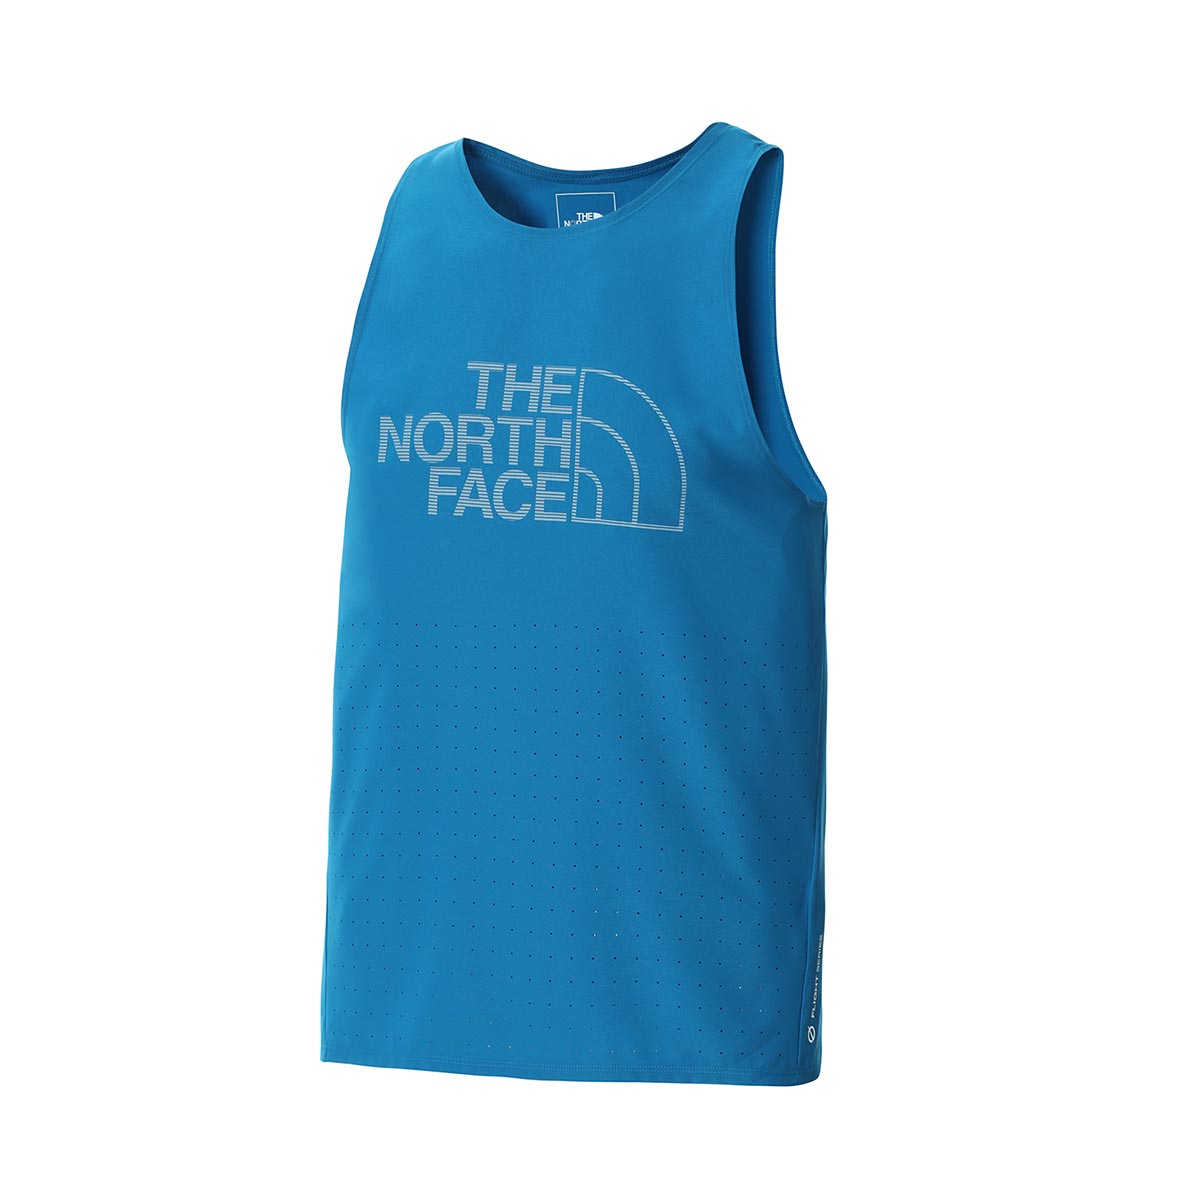 THE NORTH FACE - FLIGHT SERIES WEIGHTLESS TANK TOP